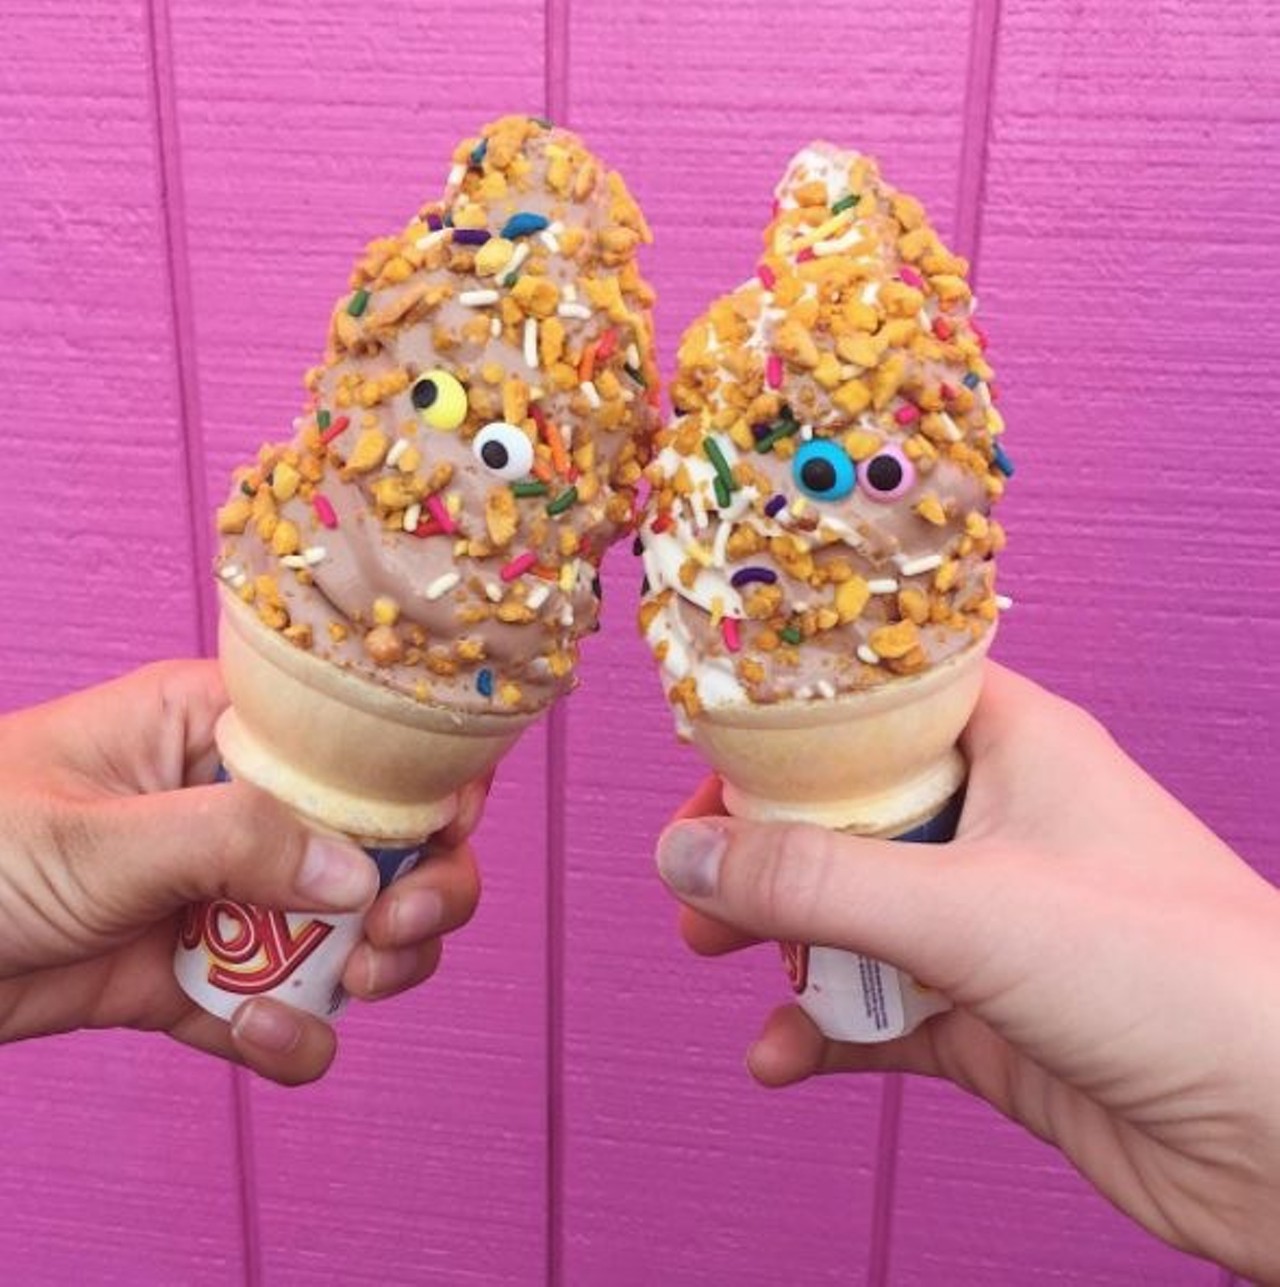  Try A Seasonal Ice Cream Flavor
Don&#146;t miss out on a  seasonal ice cream flavor at one of Cleveland&#146;s many ice cream shops. This is the perfect opportunity to treat yourself and savor the final weeks of summer. 
Photo via aliciacollinz/Instagram